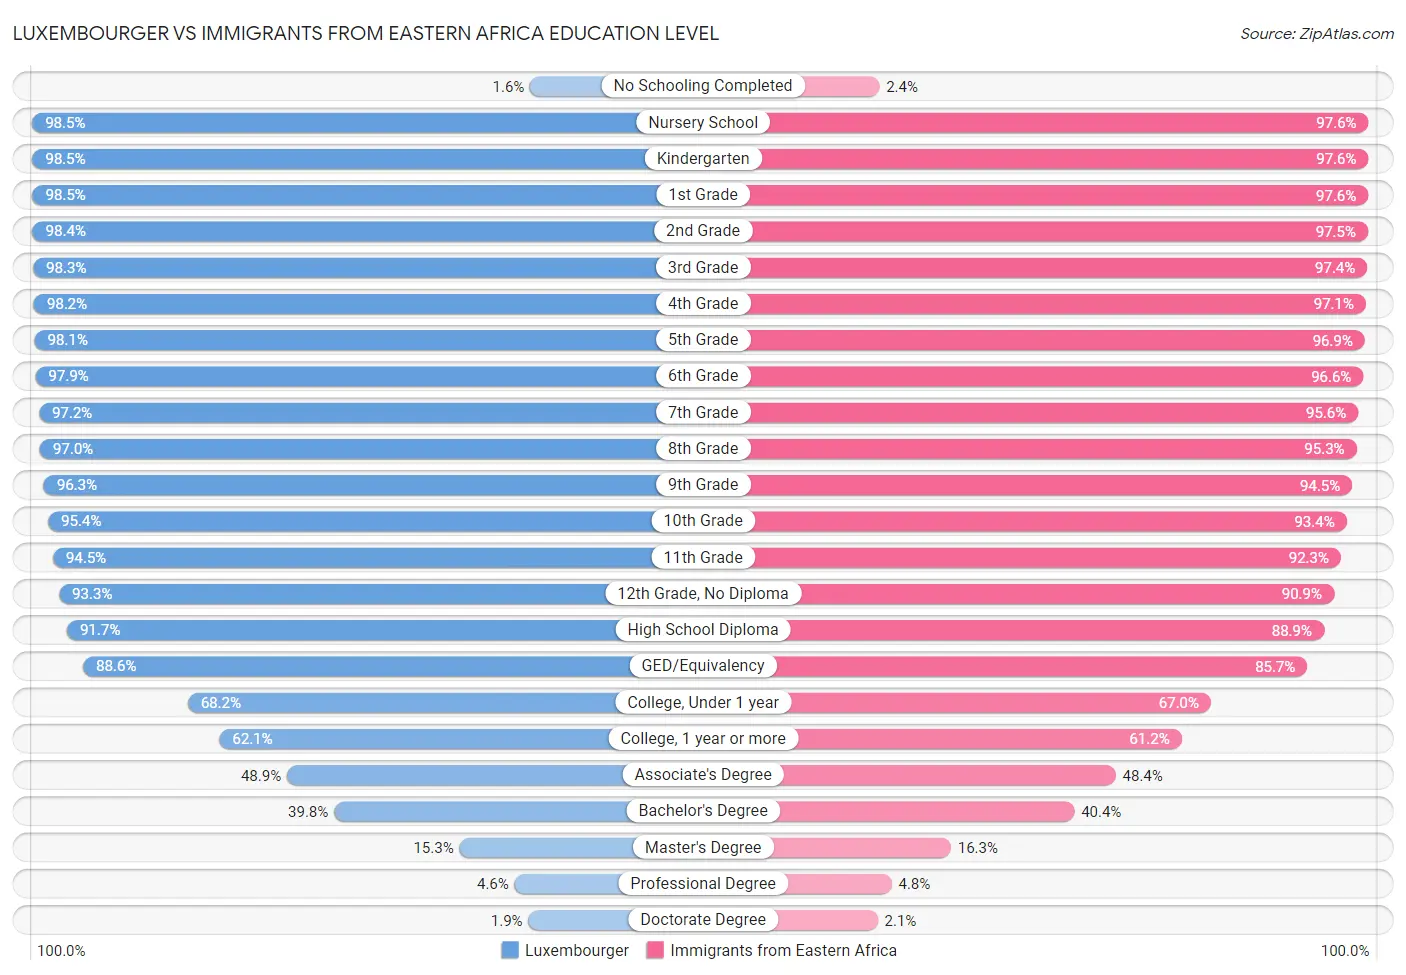 Luxembourger vs Immigrants from Eastern Africa Education Level